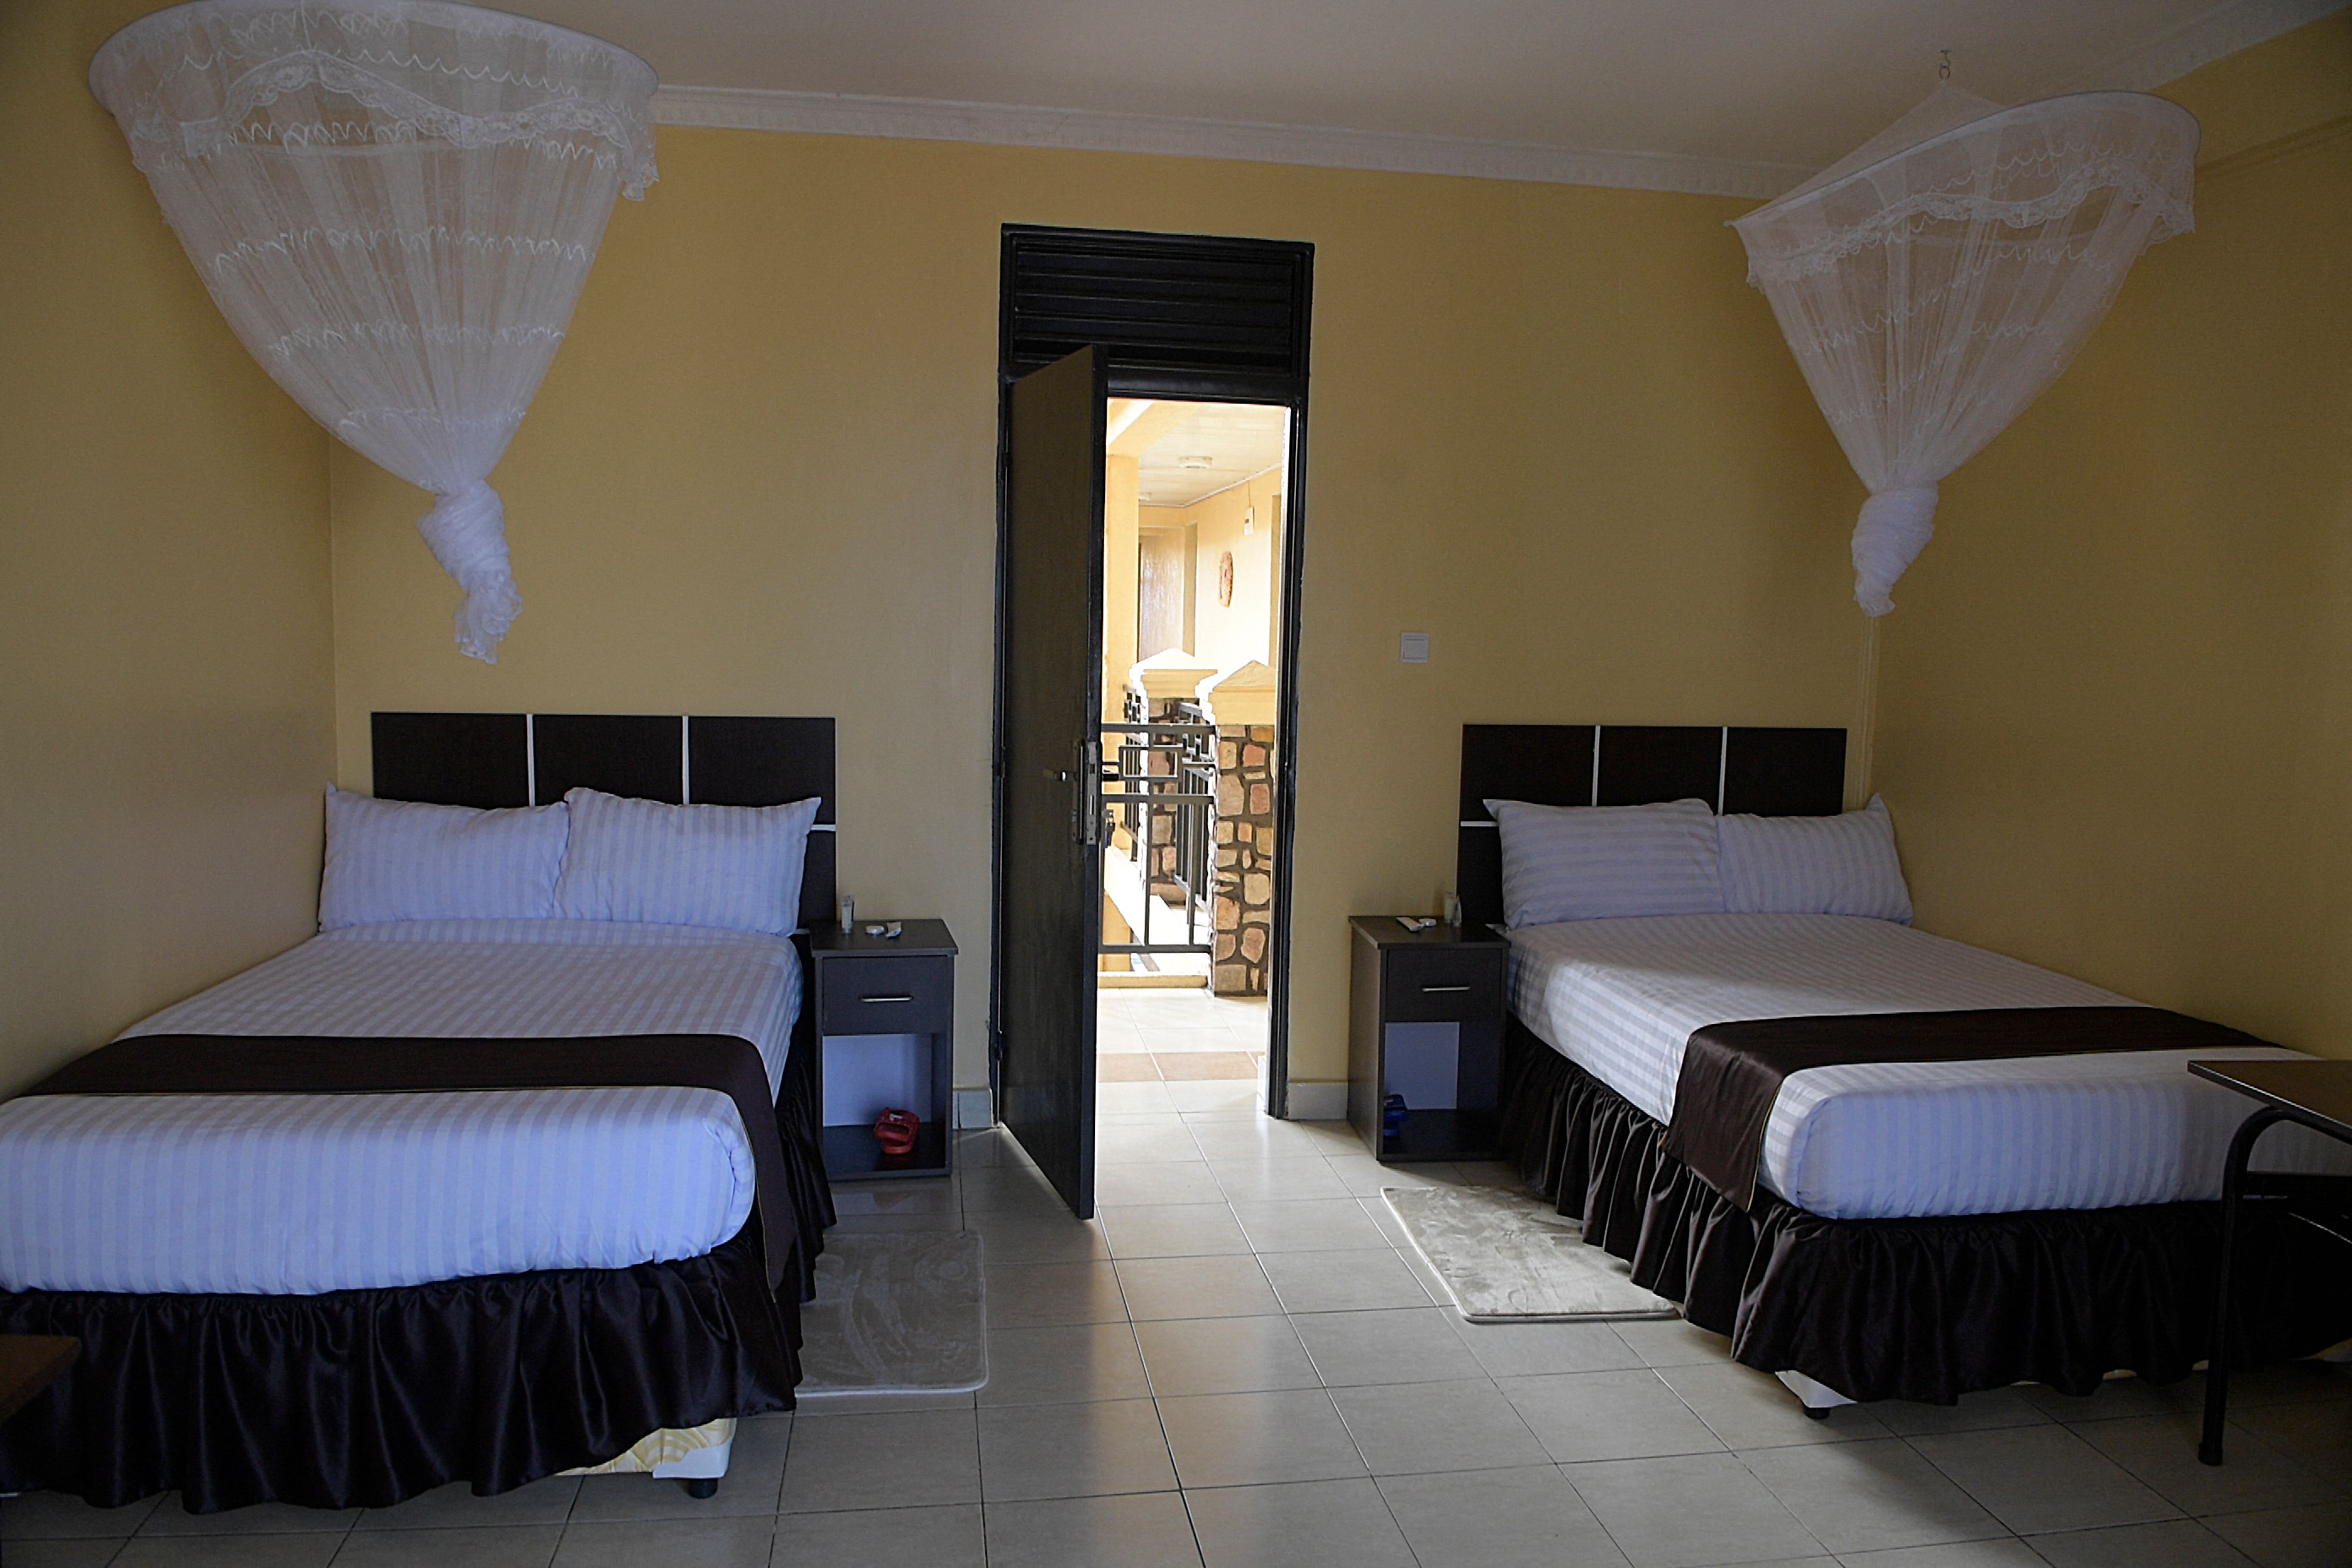 A room in the hostel for deported migrants